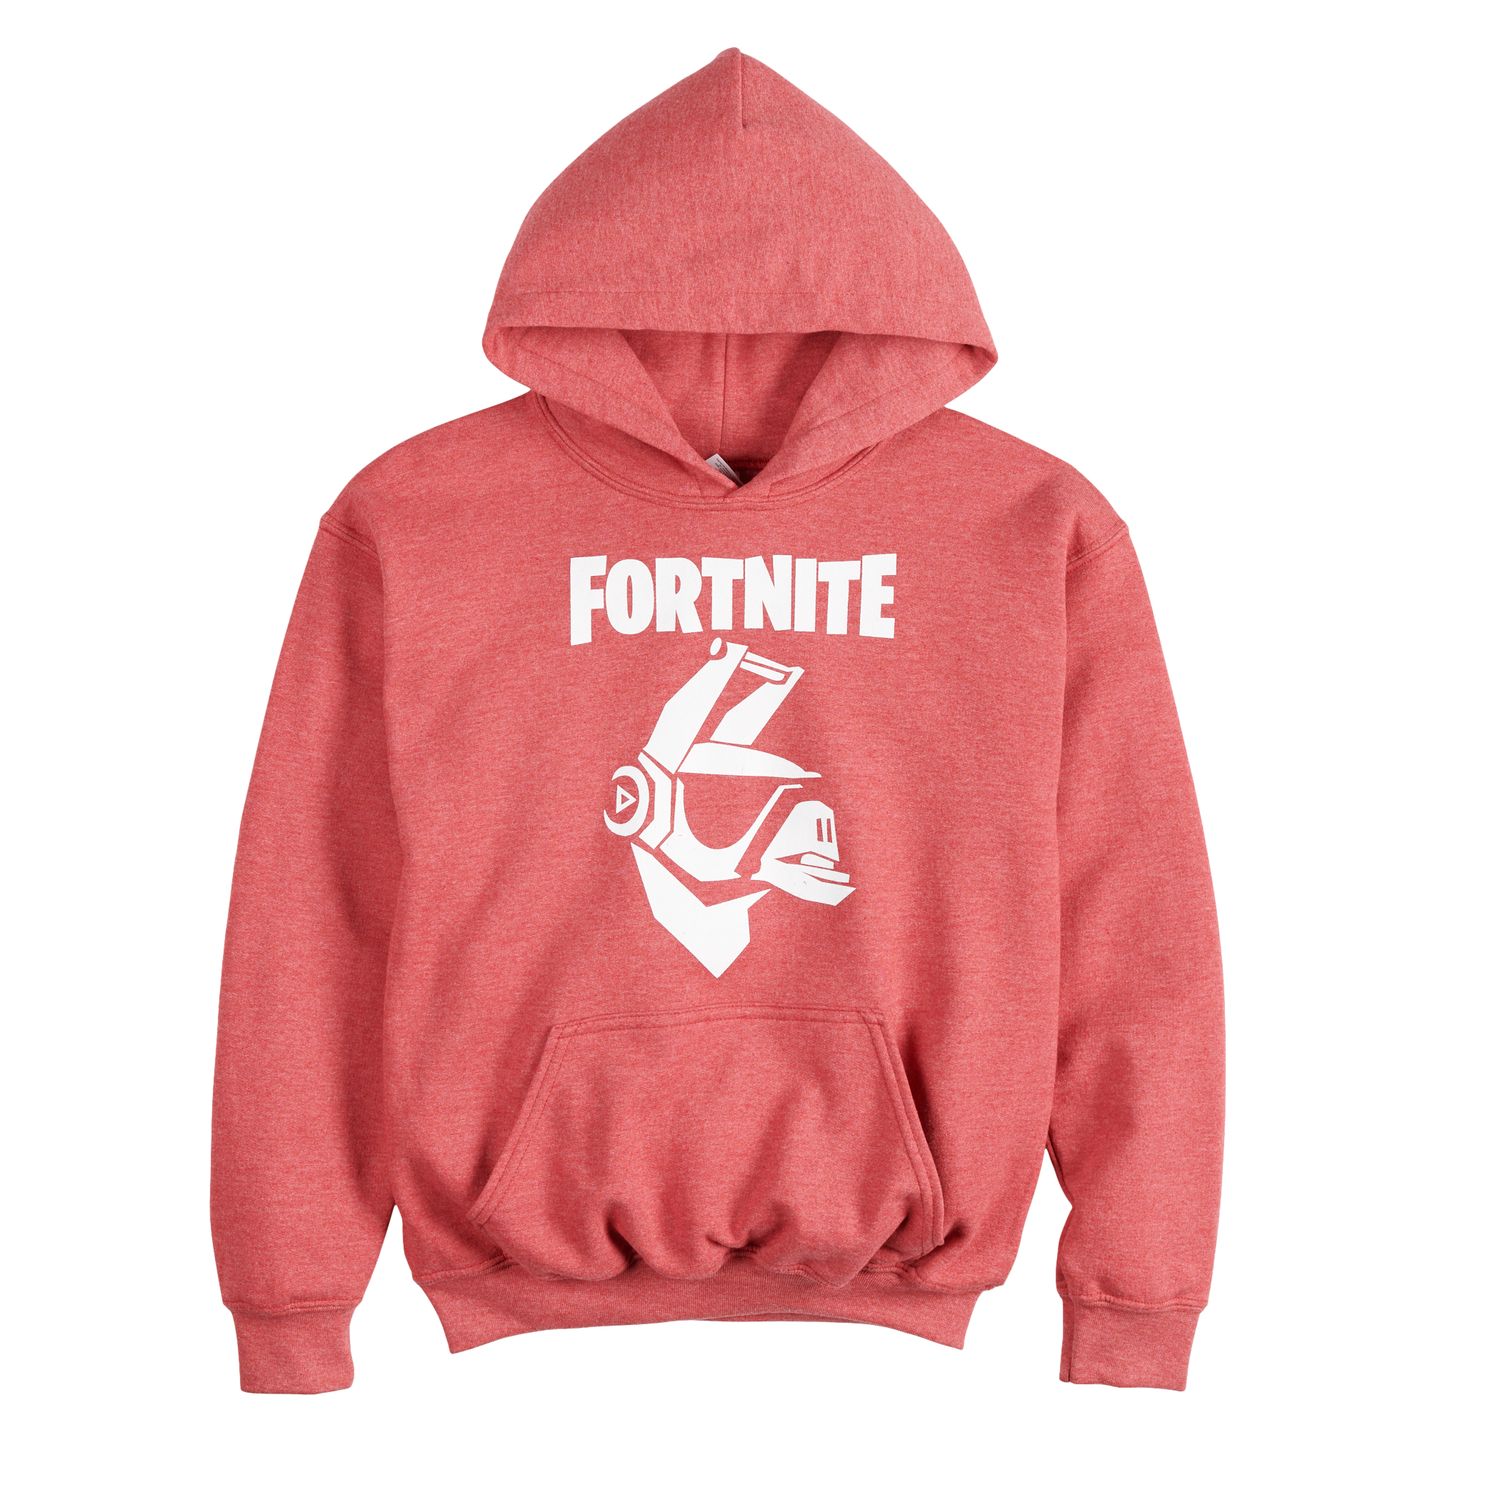 Fortnite Gear: Toys, Shirts, Hoodies and Gaming Bundles